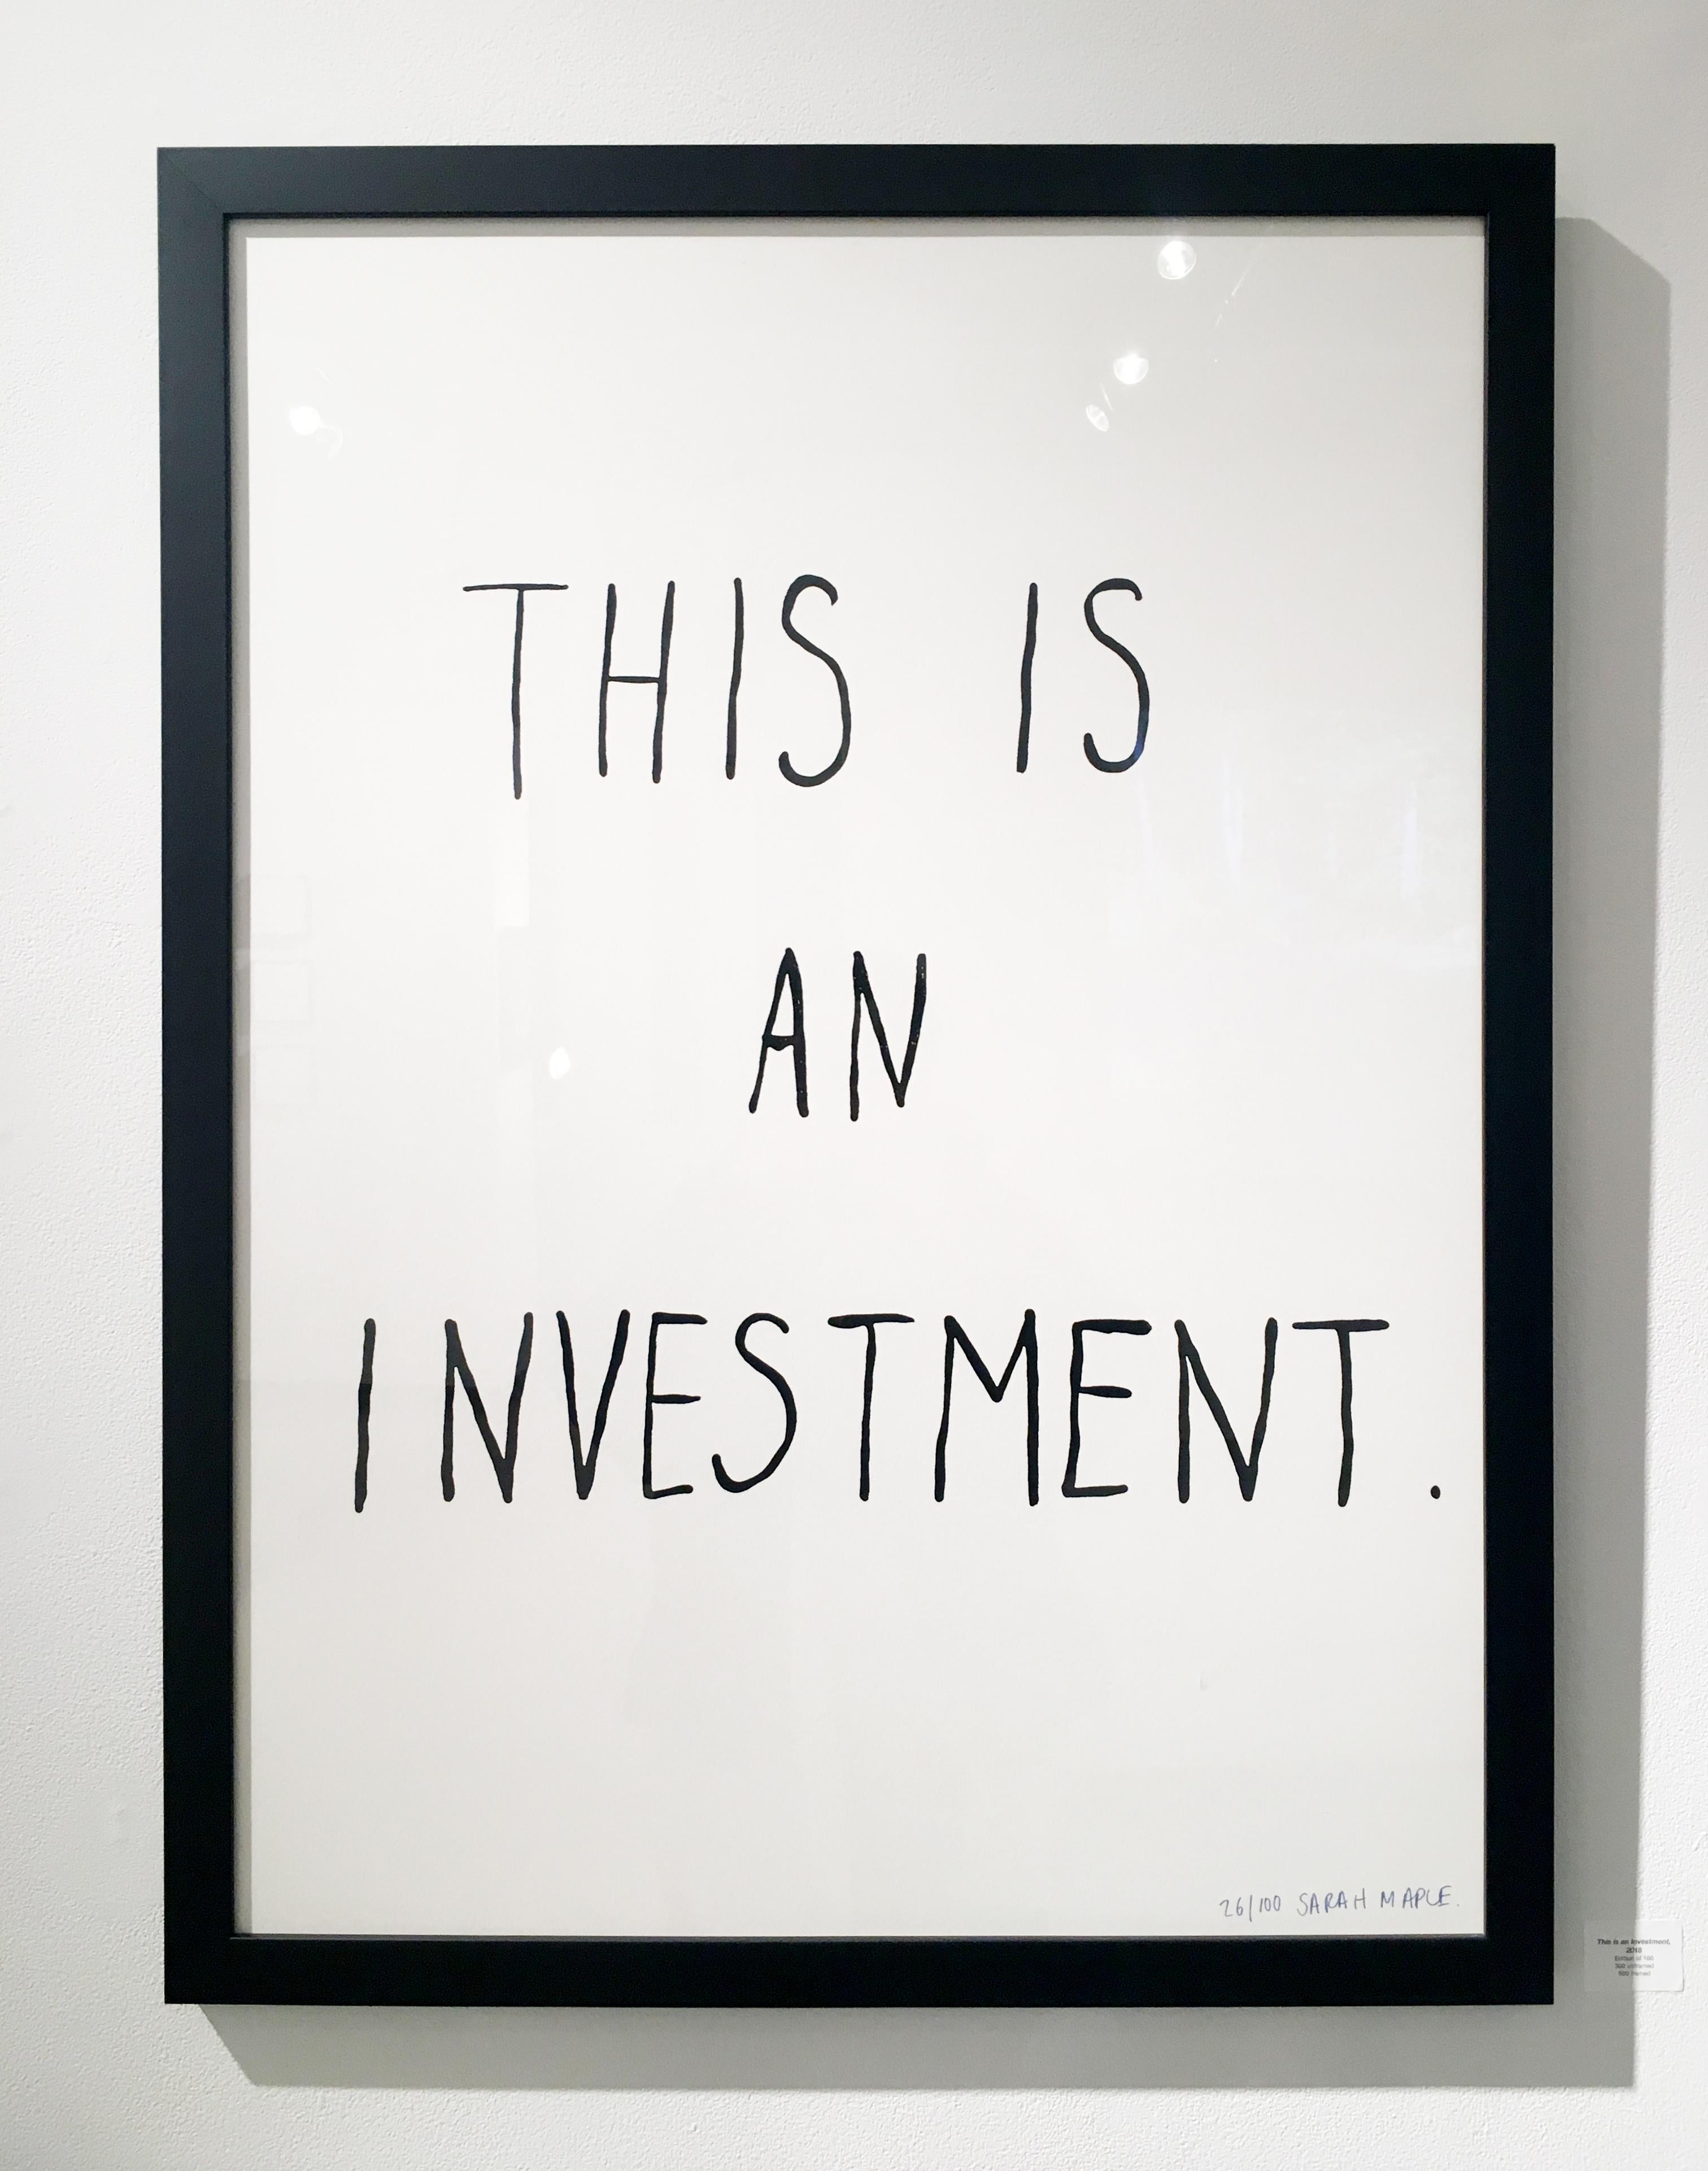 This is an Investment, Drawing, Collage, Black and White, Text, Signed. Framed - Art by Sarah Maple